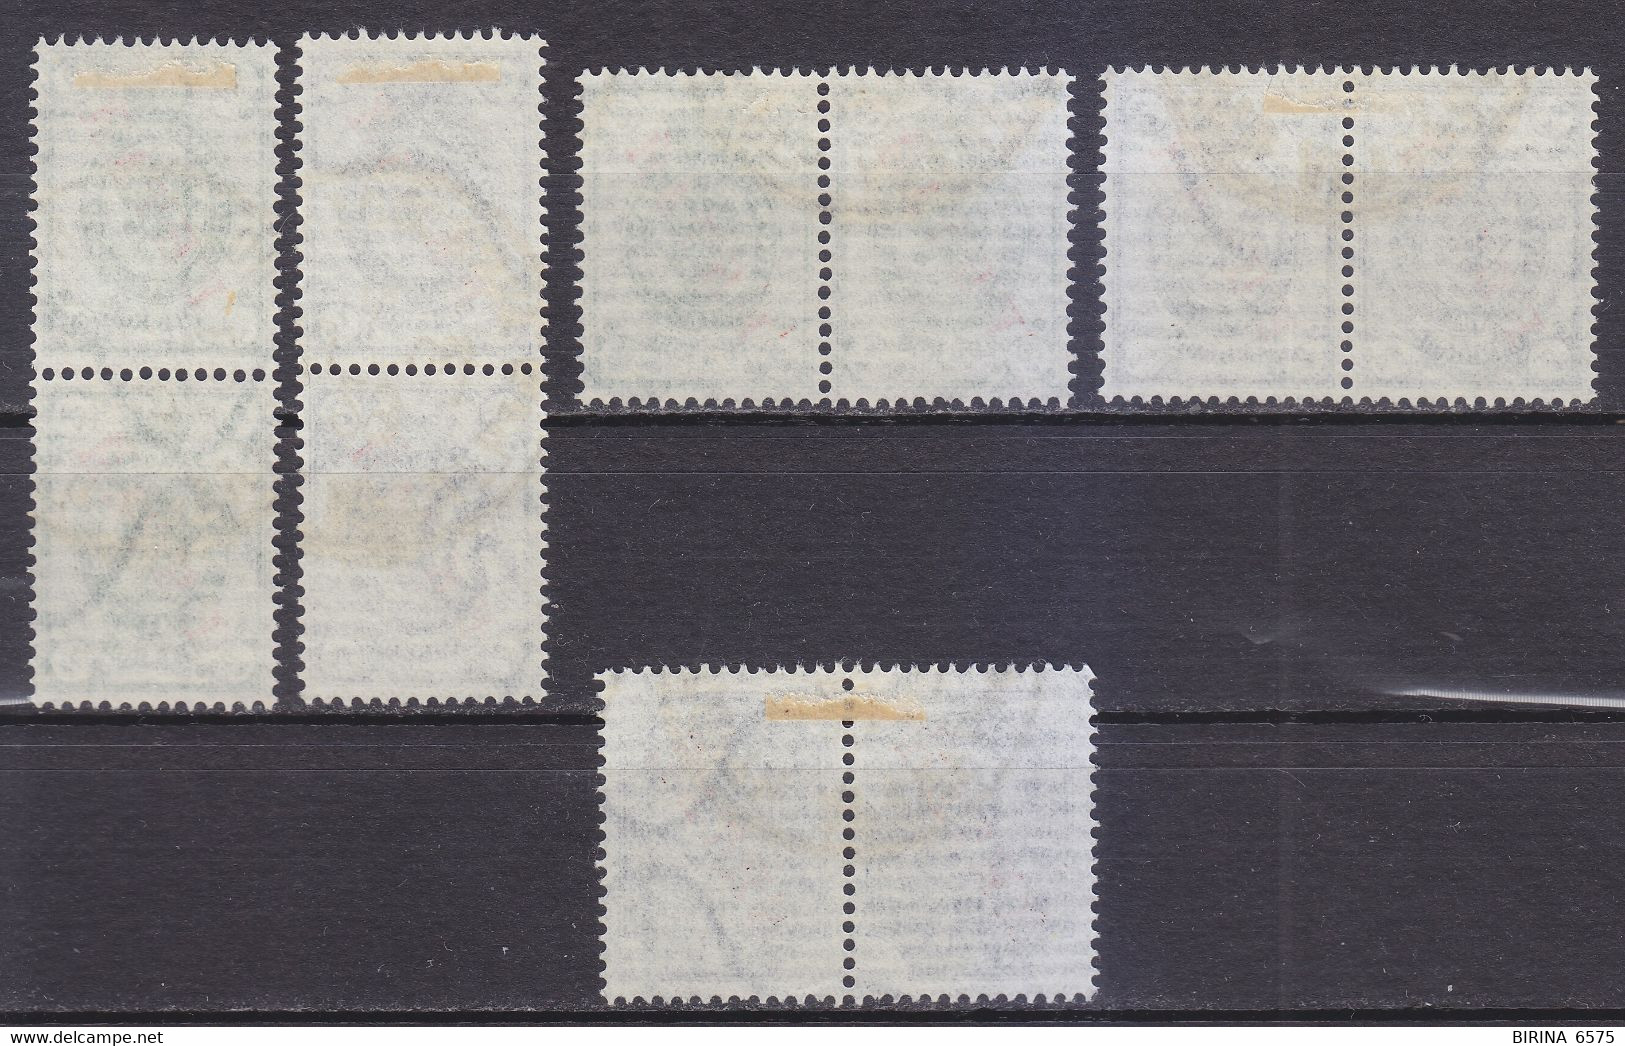 Russian PO In China. 1900 "Port Arthur" Cancellation. 5 Pairs - M - China